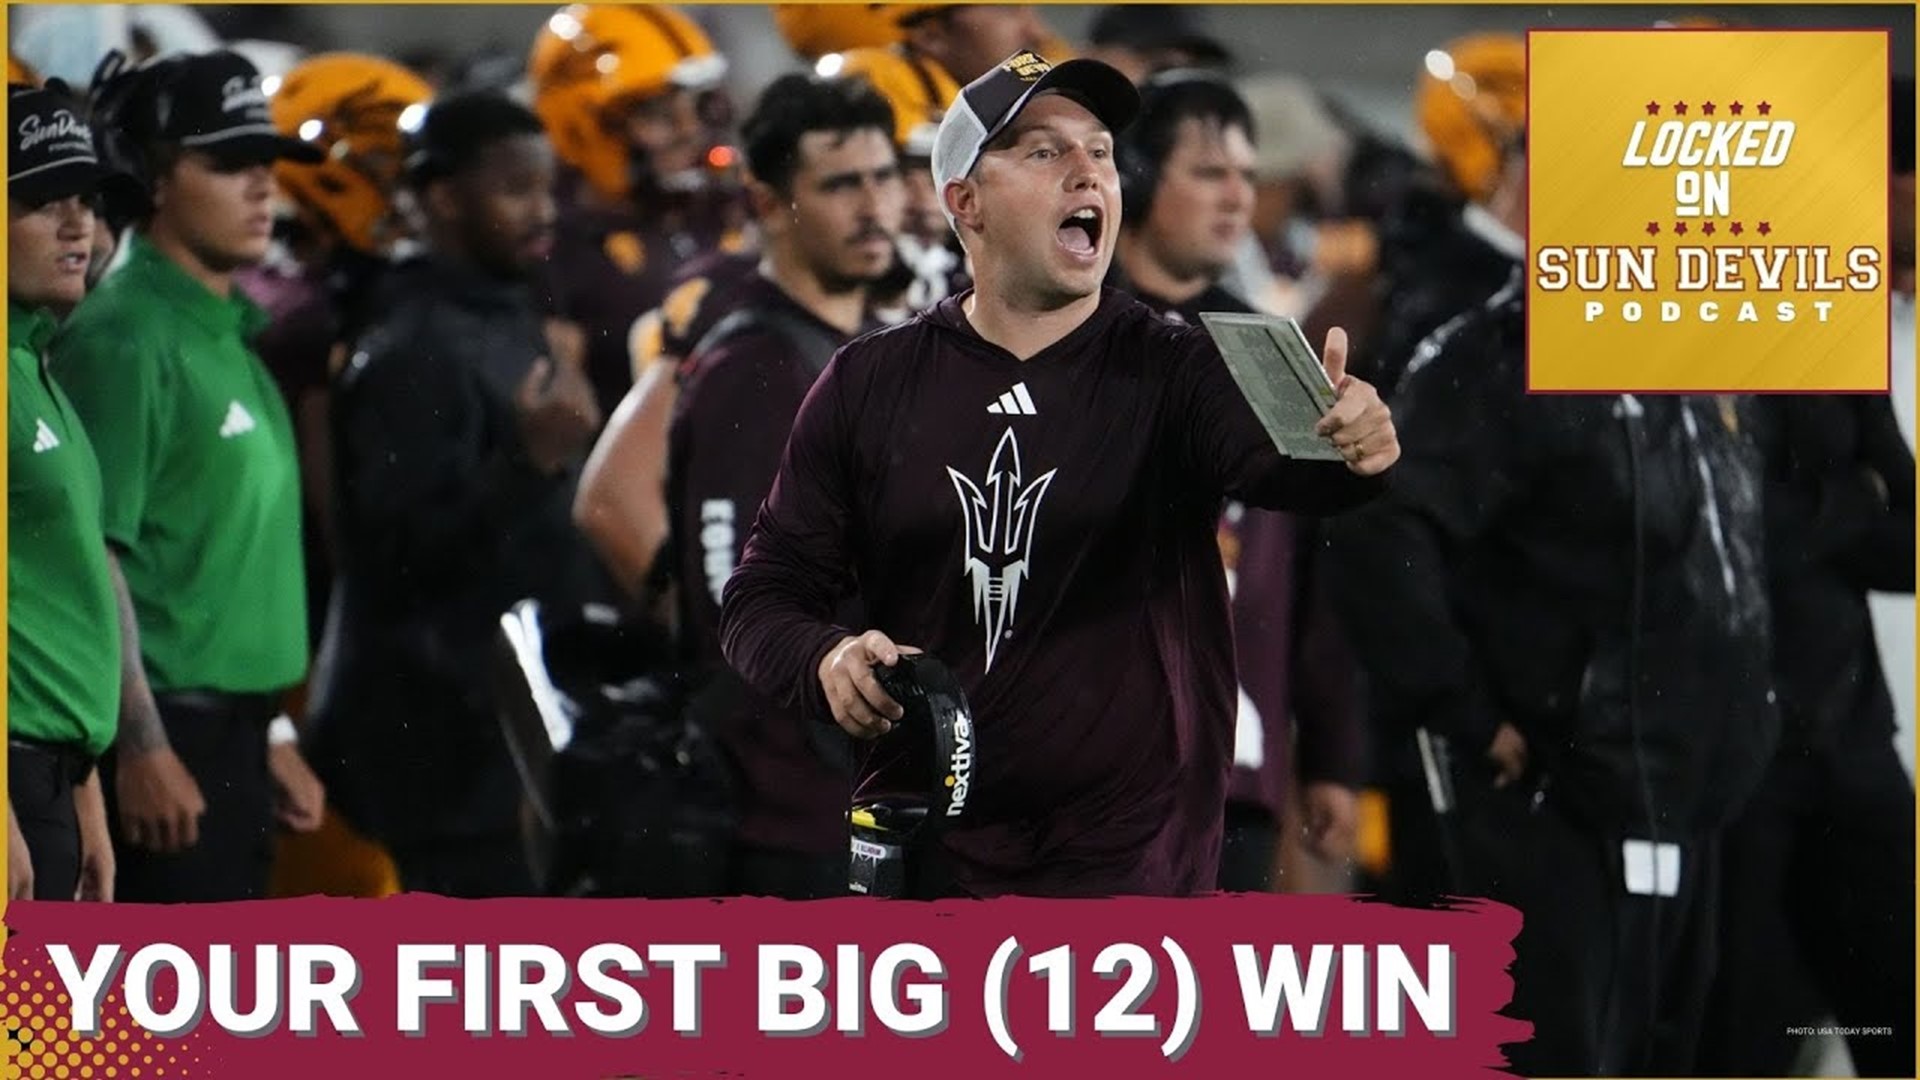 Host Richie Bradshaw discusses why a win could be so important for Arizona State Sun Devils football in the Kenny Dillingham era and more.